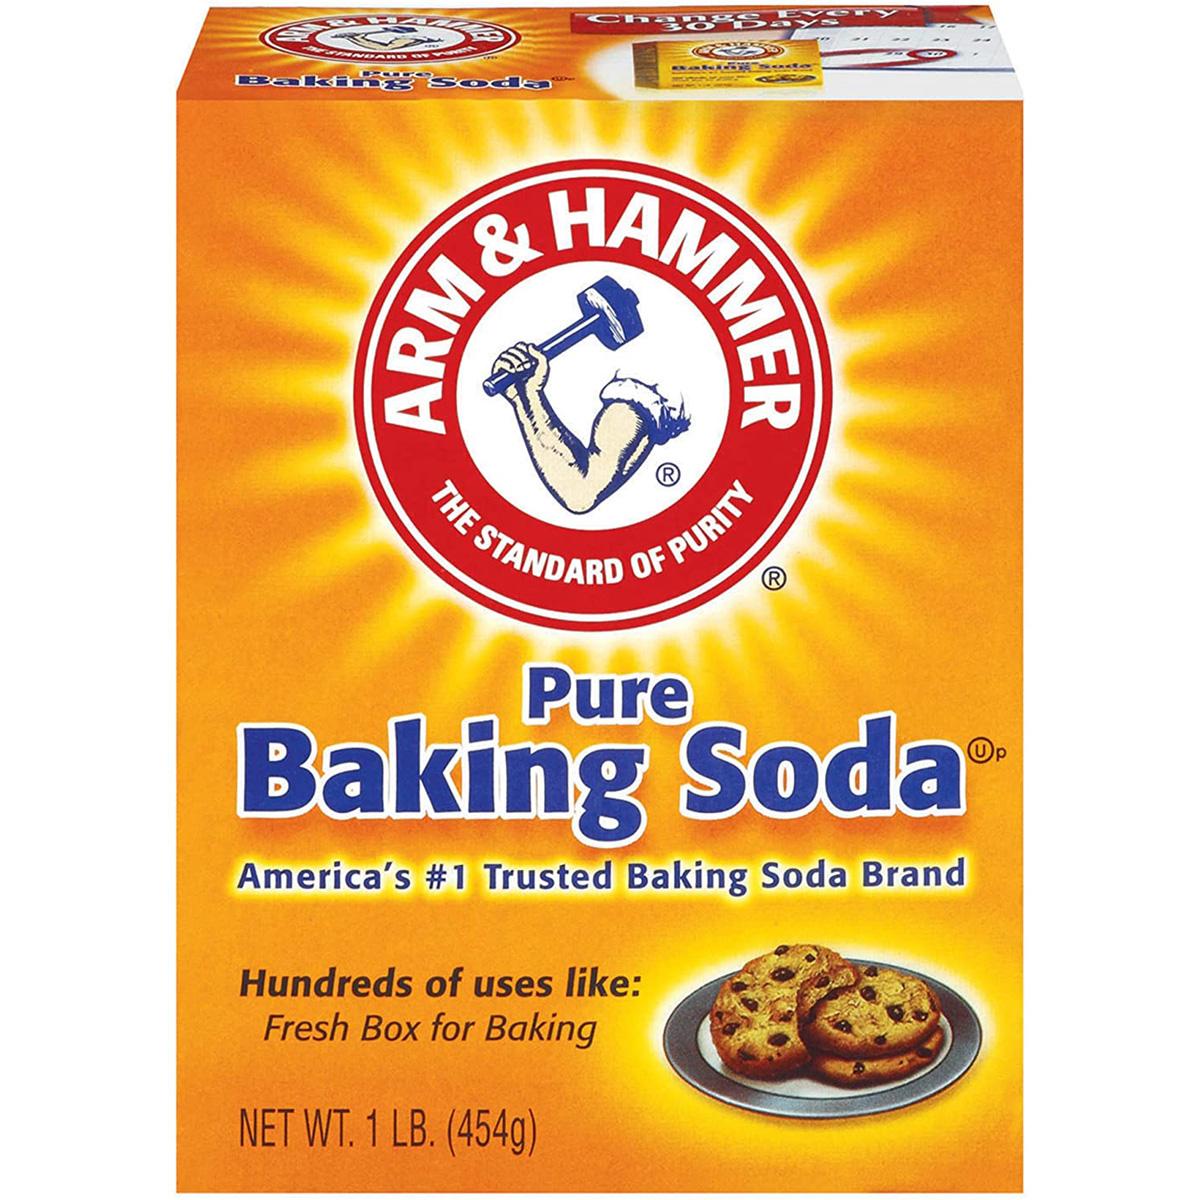 Arm and Hammer Baking Soda for $0.82